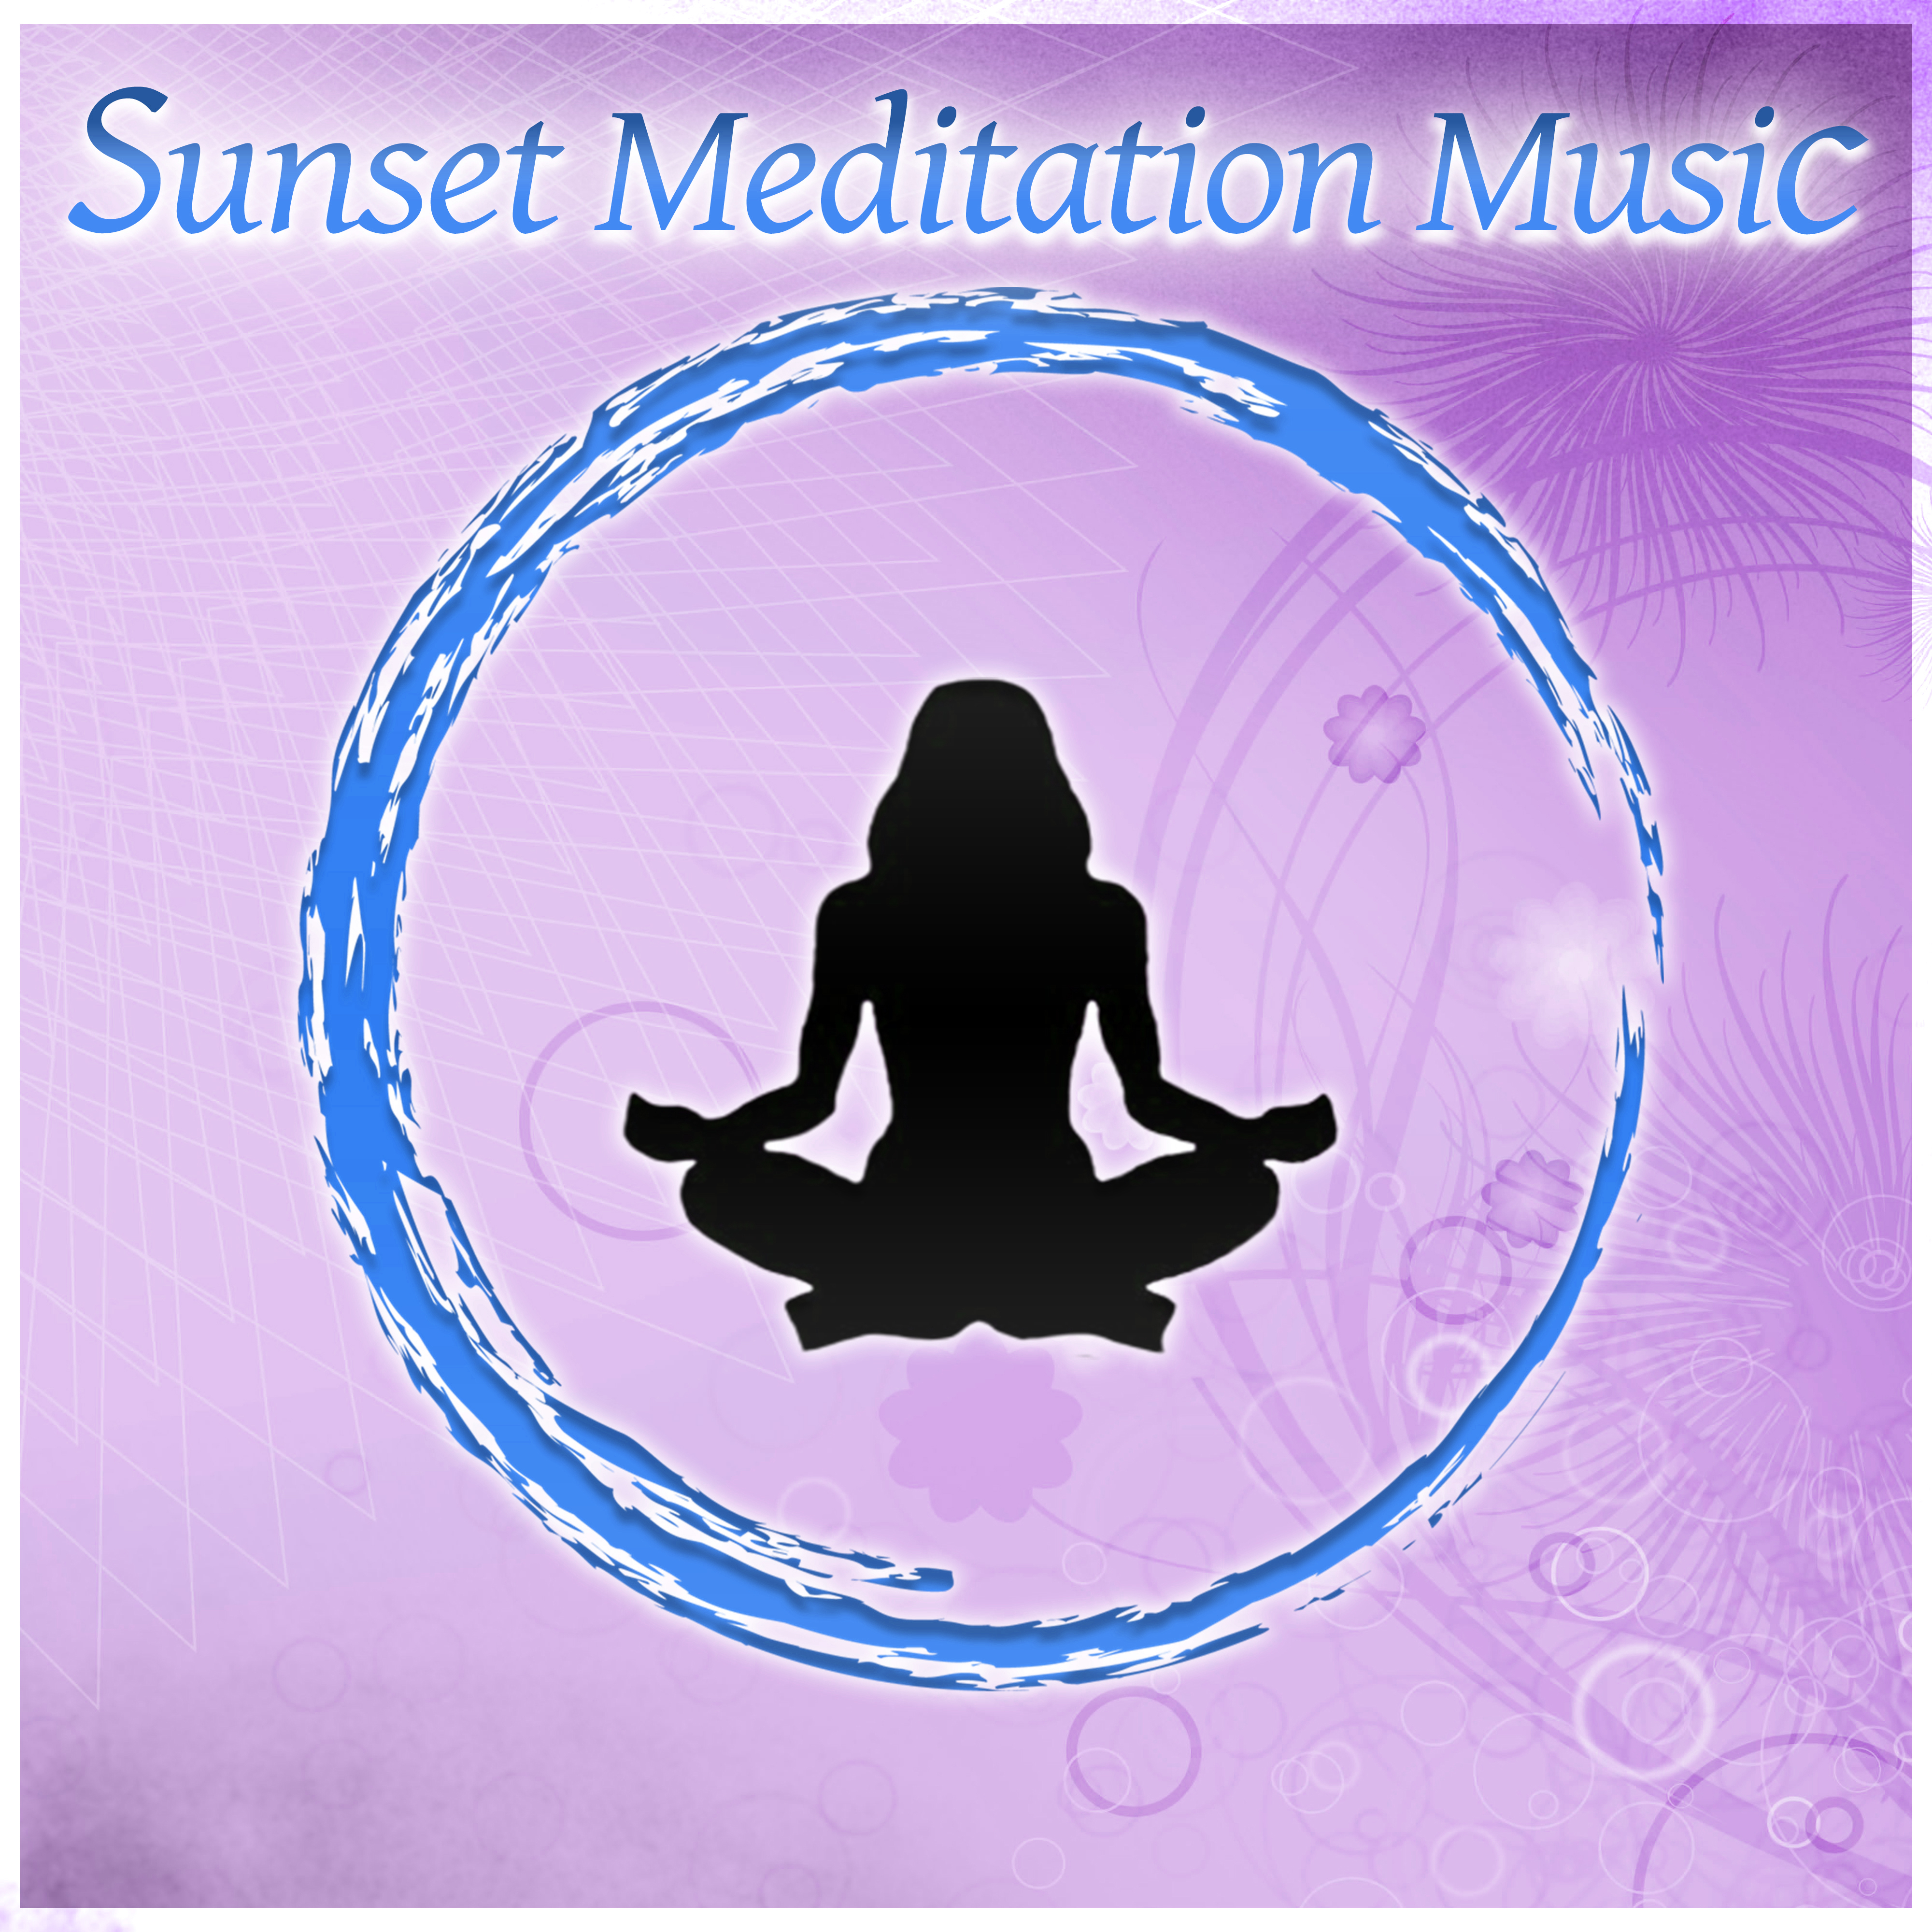 Sunset Meditation Music  New Age Music for Meditation at Home, Feel Like on the Beach and Pure Soul, Mind  Body, Deep Relaxation, Healing Music, Calmness, Mindfulness Meditation